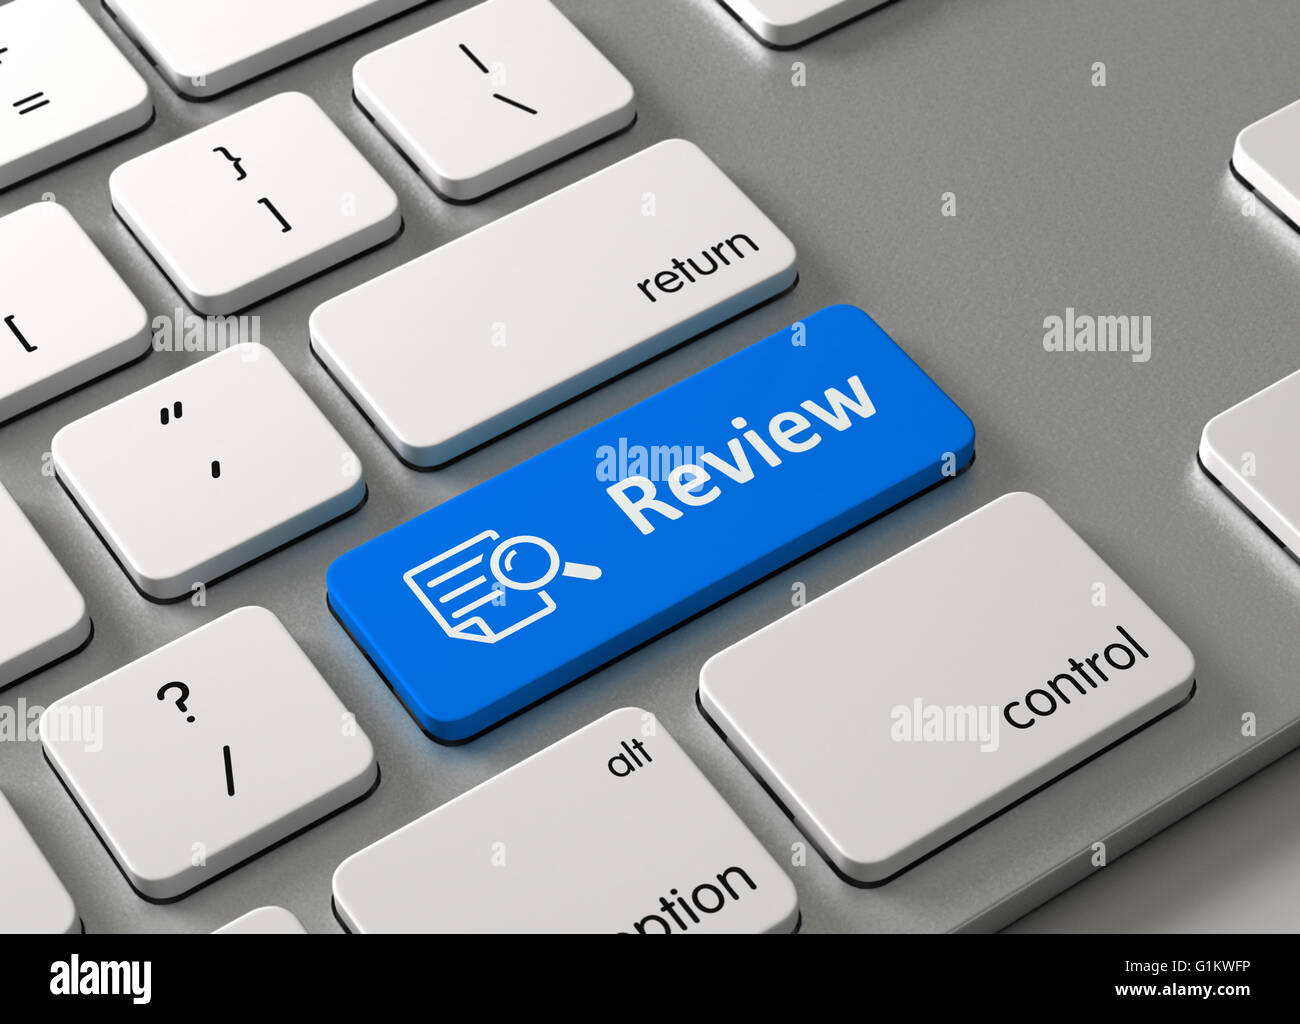 A keyboard with a blue button Review Stock Photo